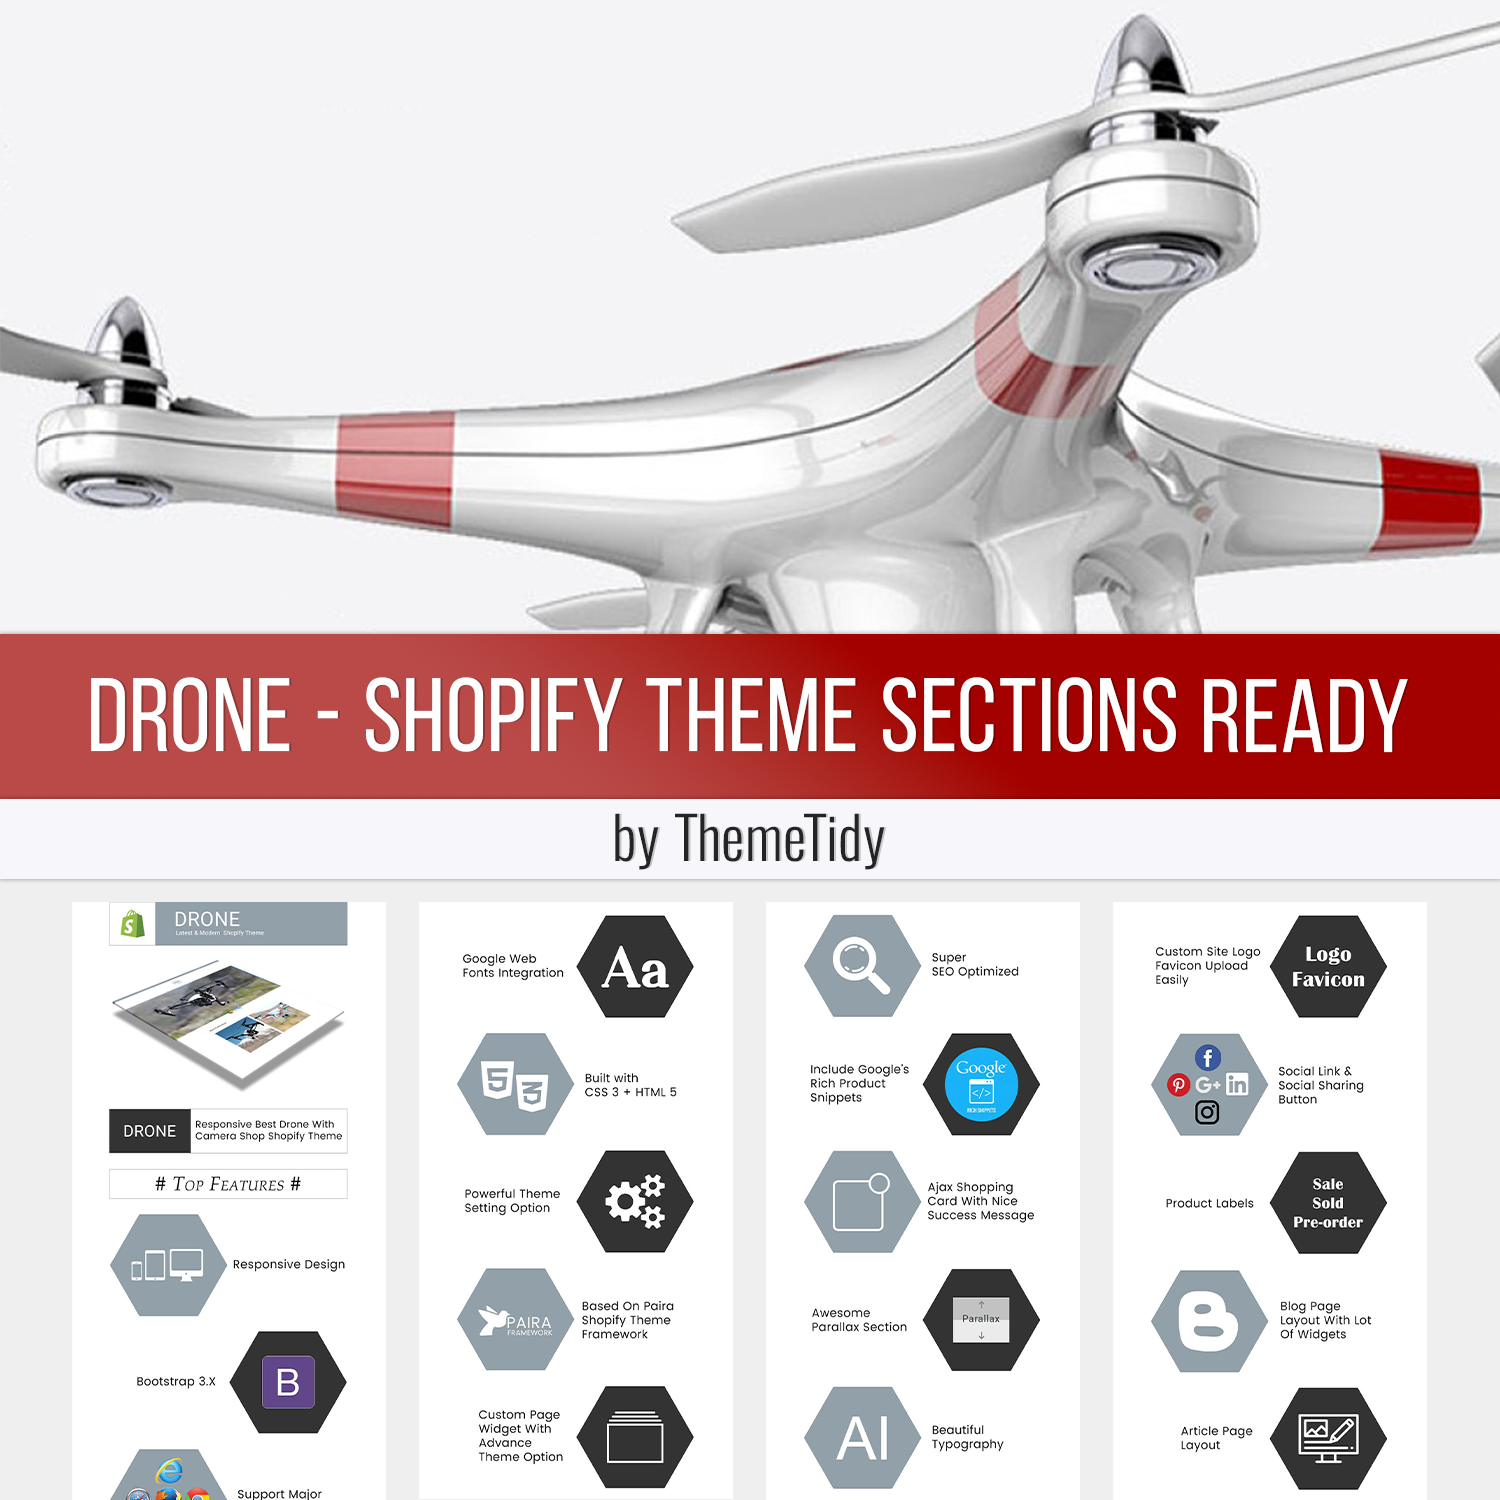 Prints with drone shopify theme sections ready.